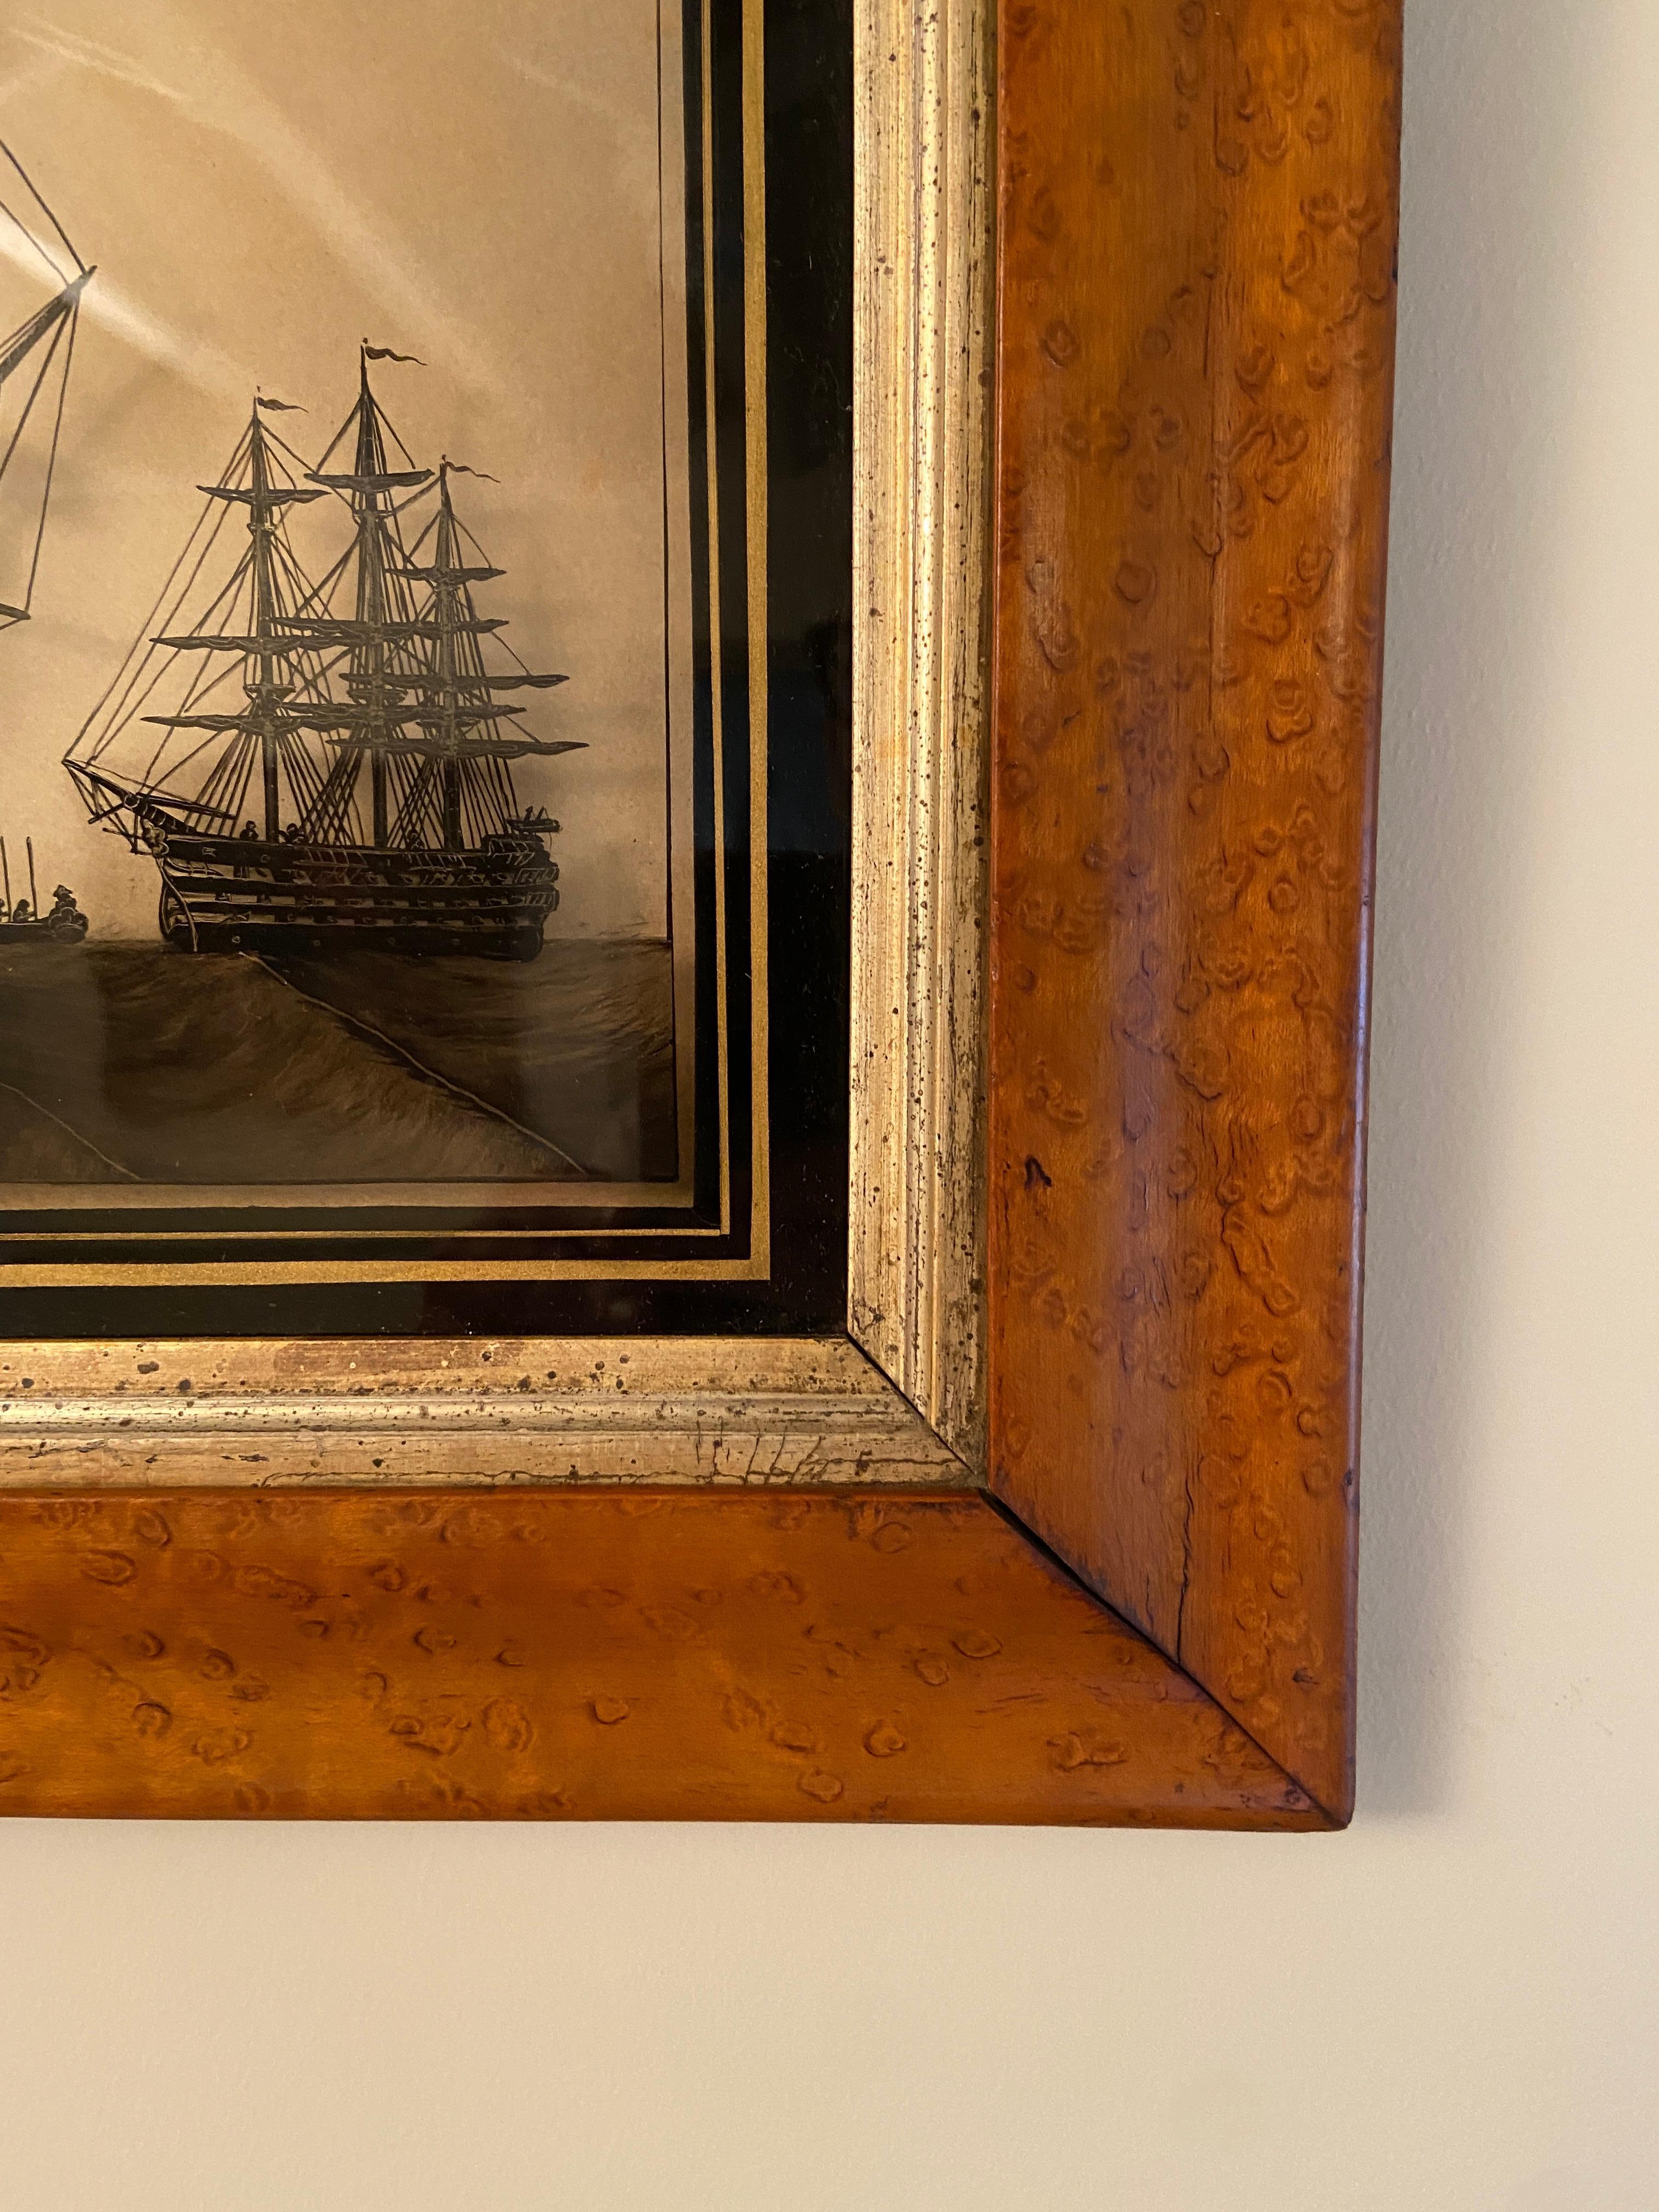 An early 19th century maple framed reverse glass silhouette painting of Nelson's flagship Victory. 

Silhouette reverse glass paintings were popular in the 19th century and well known ships of the period were a popular subject matter. HMS Victory